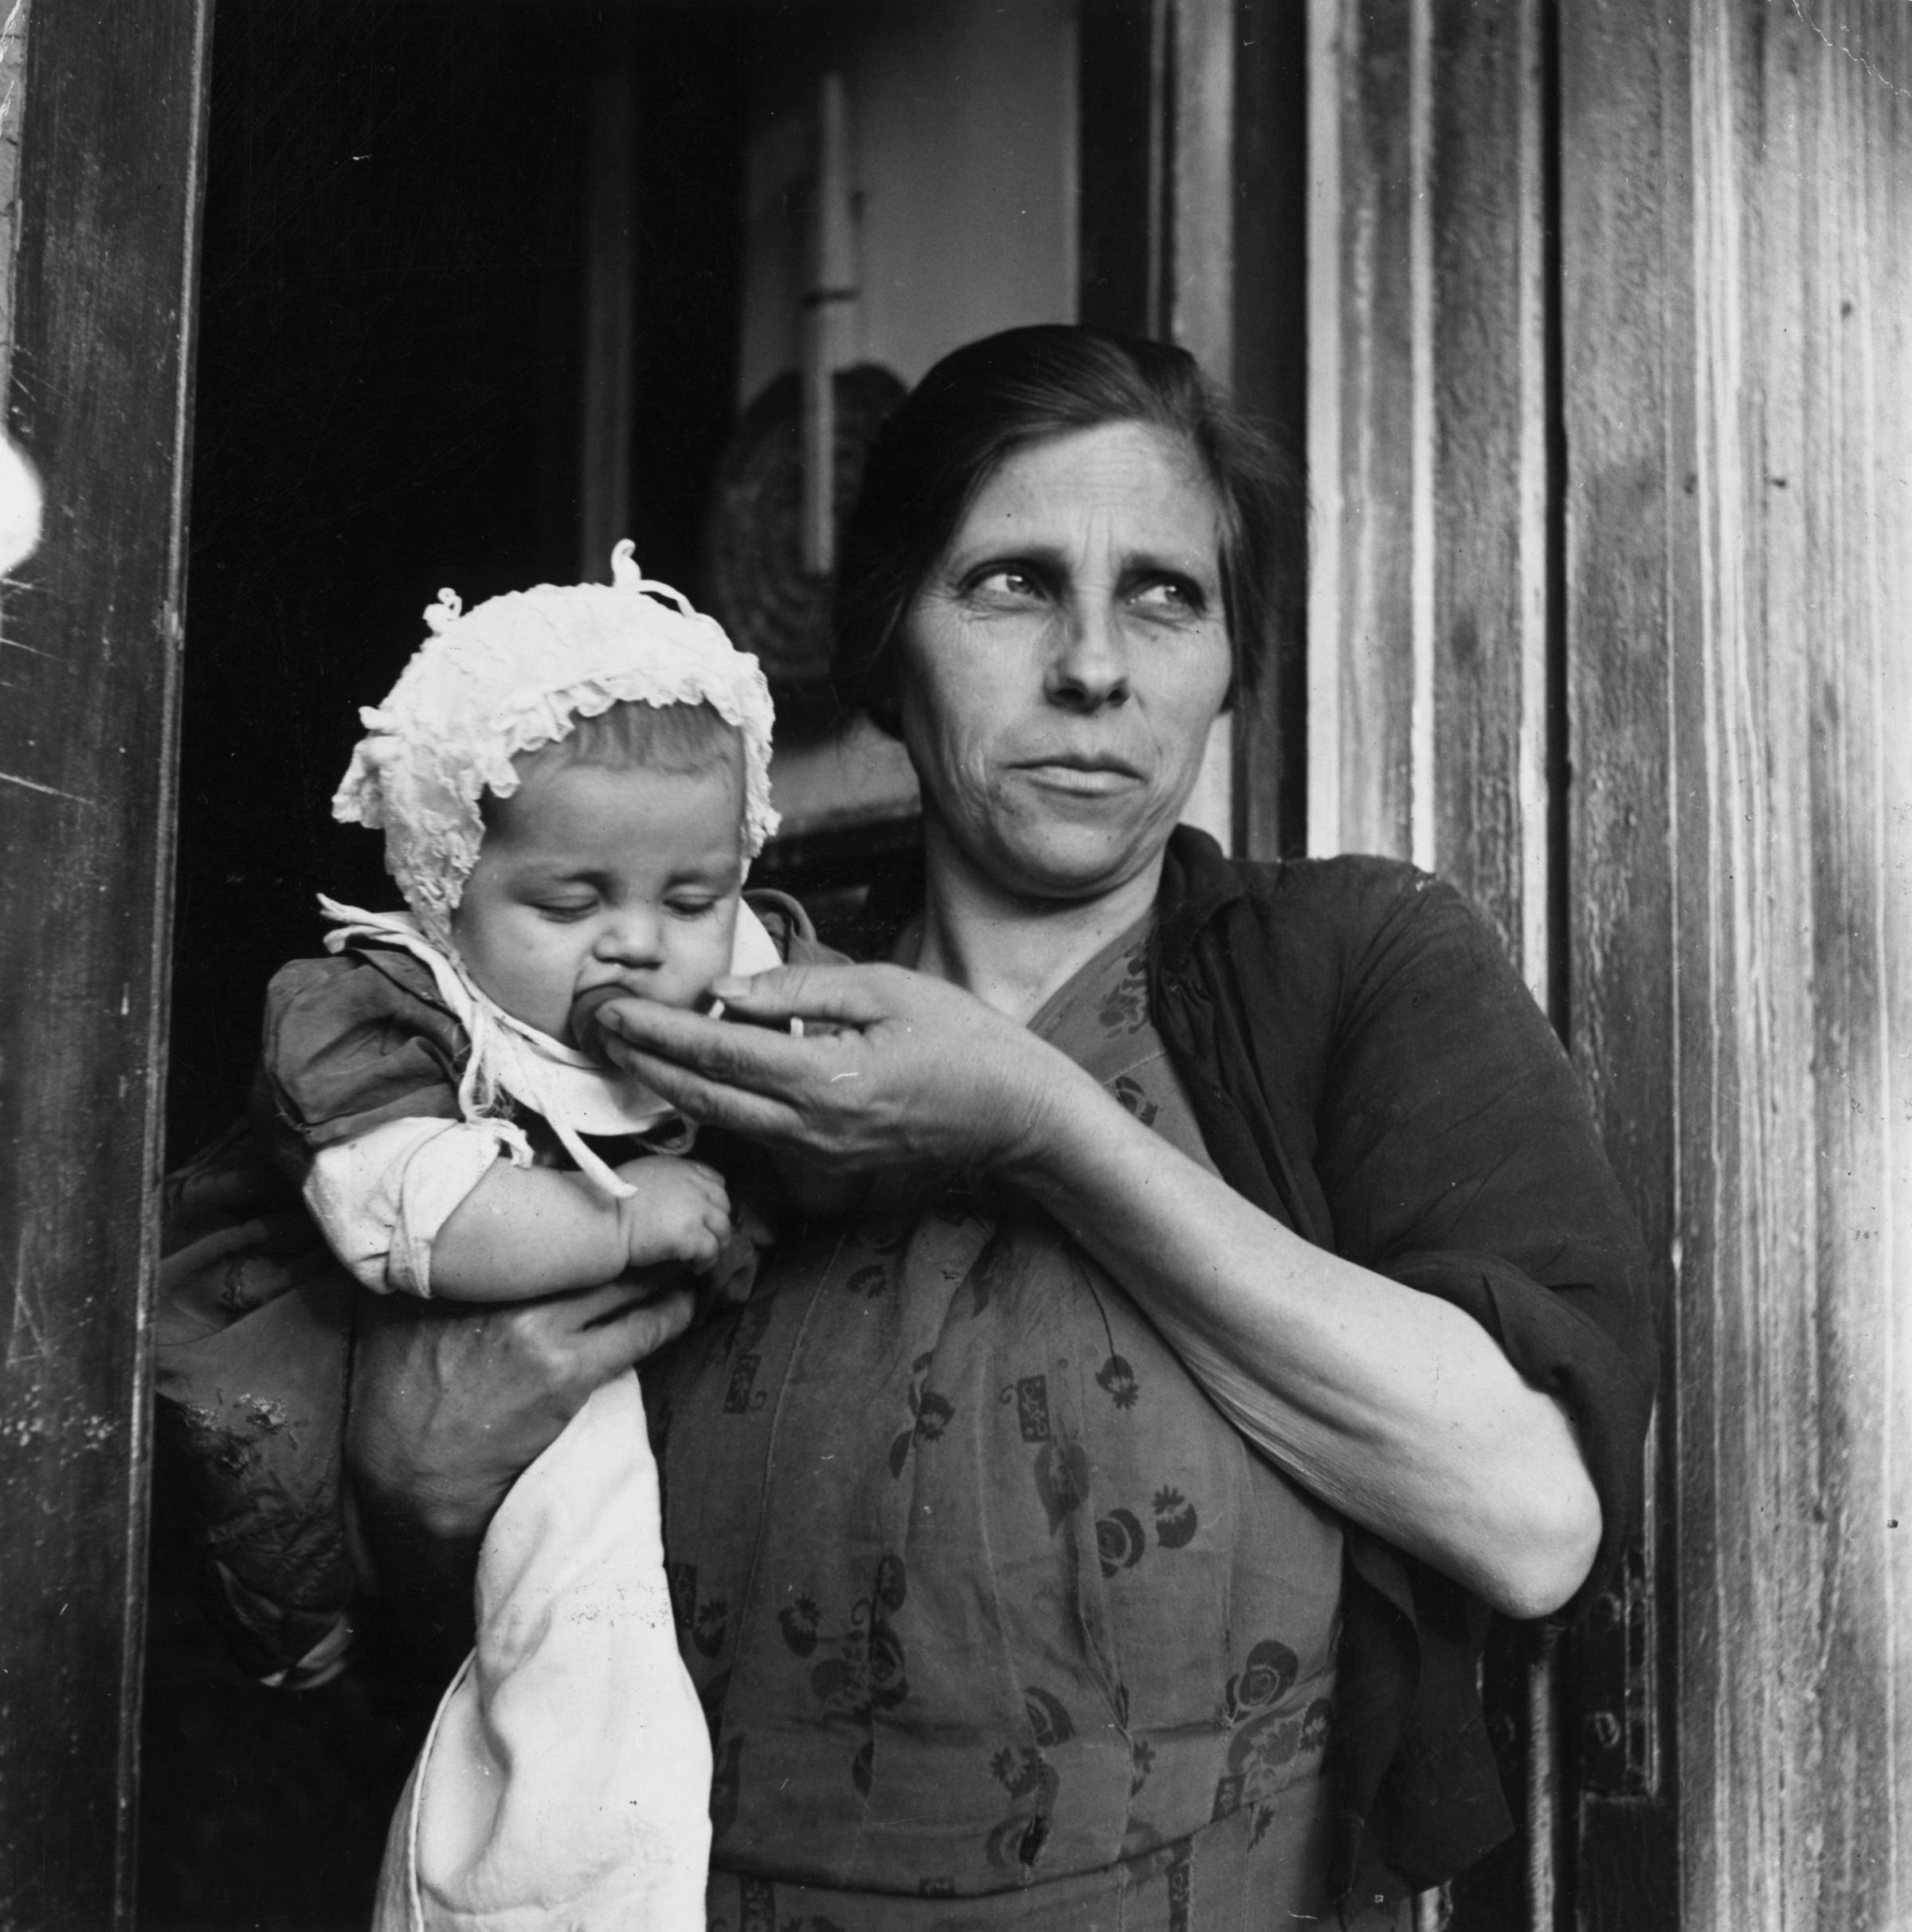 An Italian woman holding a baby in the doorway of her home in Naples, 1950.